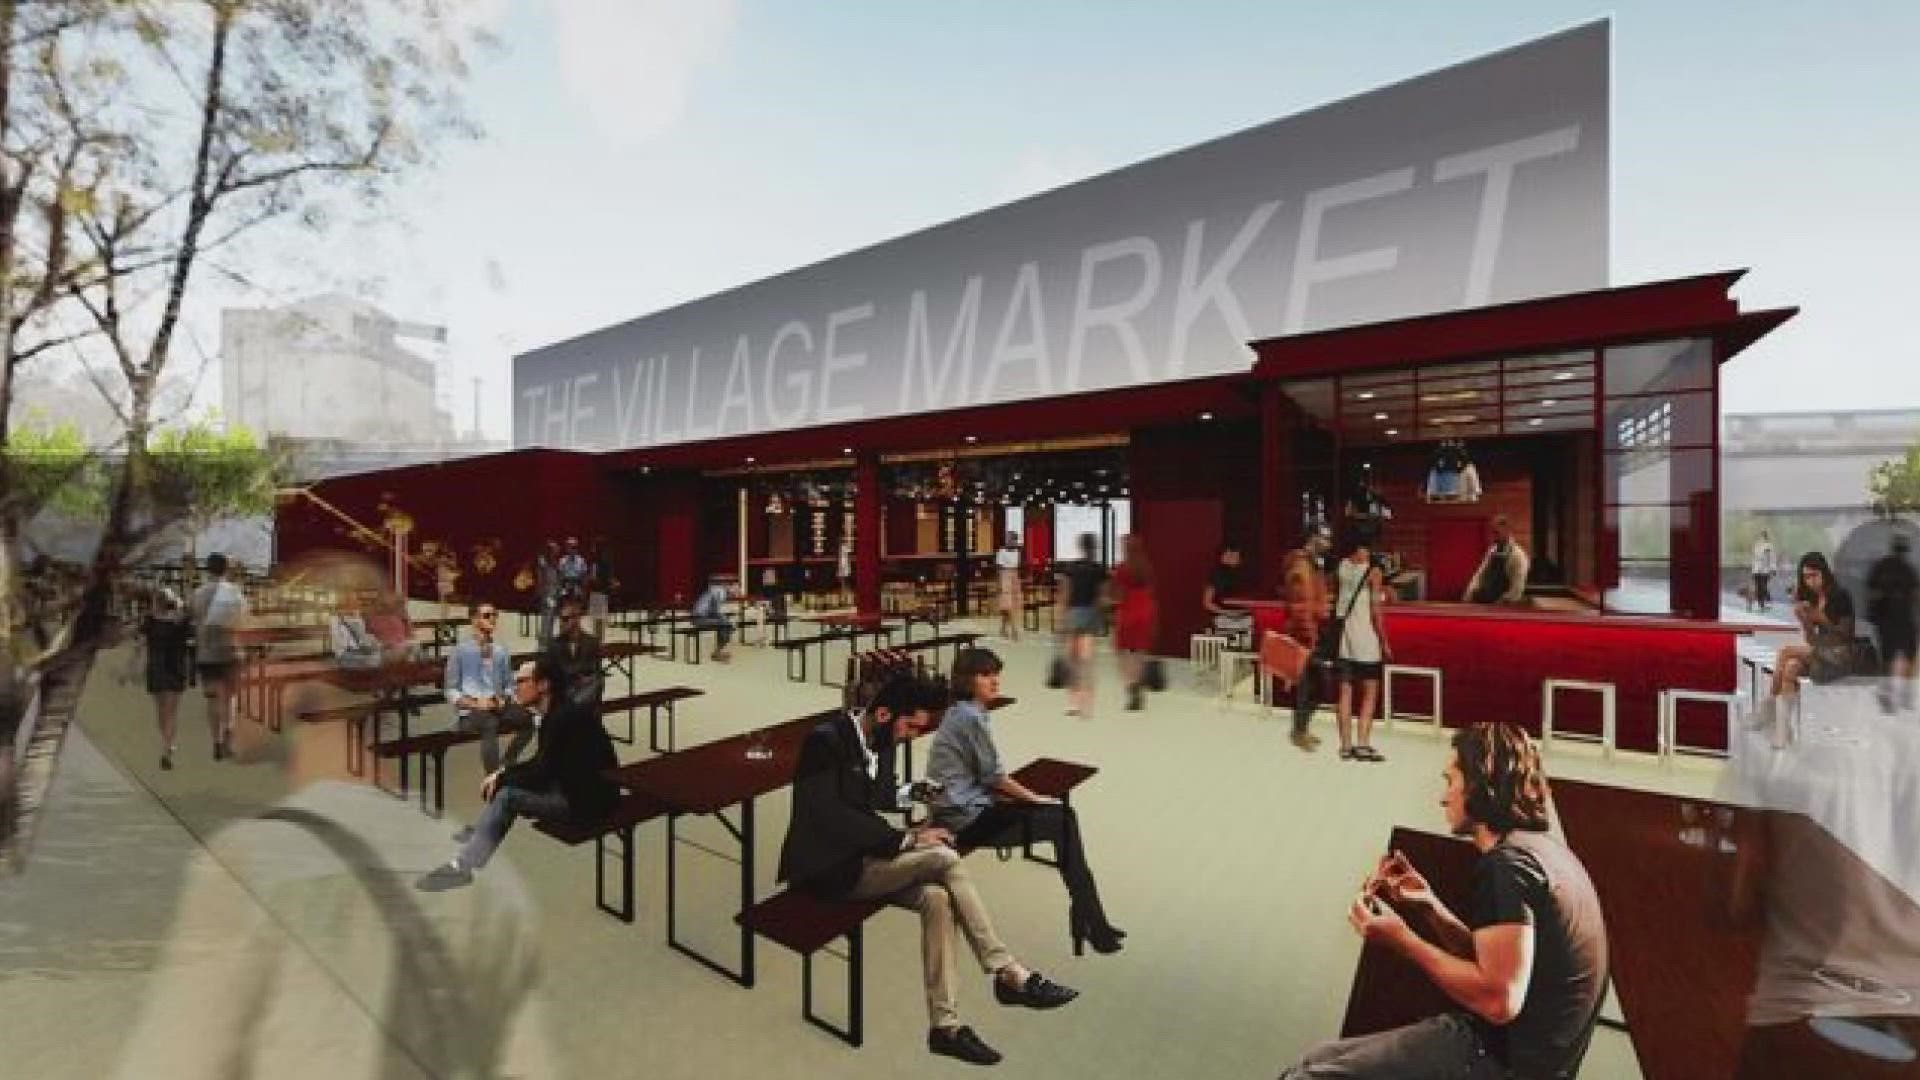 The new food hall will feature five local restaurants and will be located where "The Cafe" used to be on Brent Street.